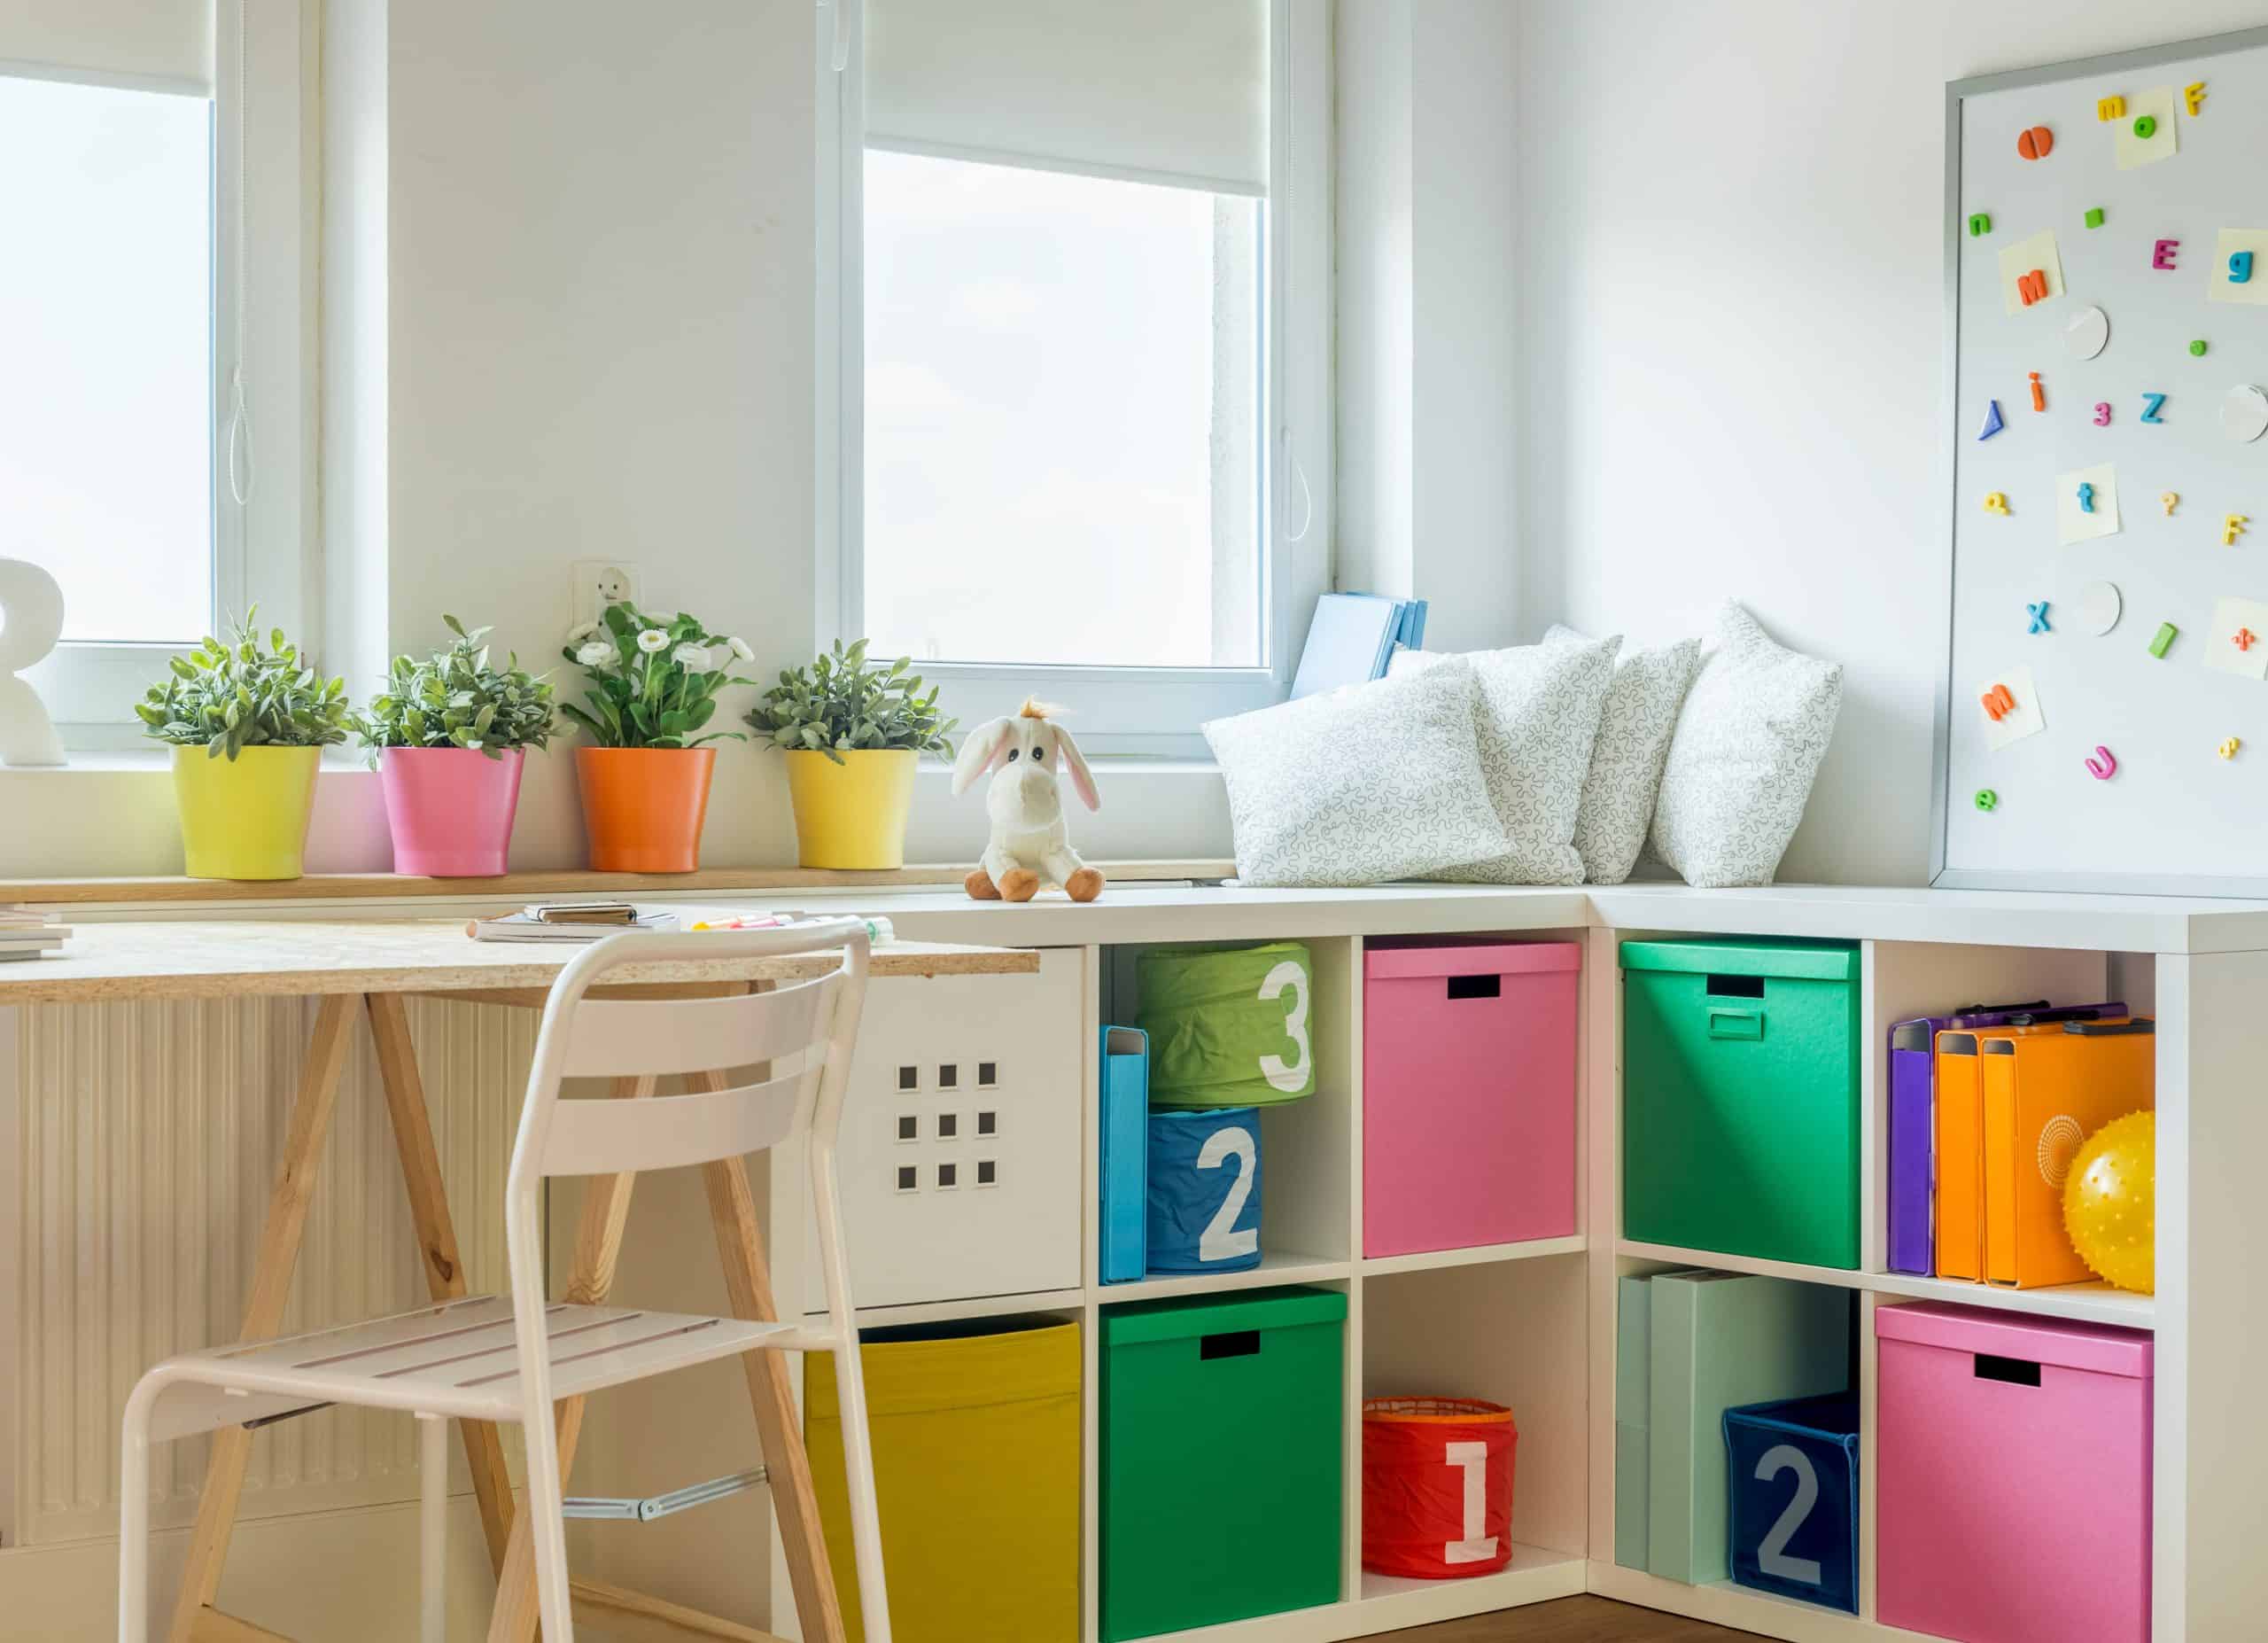 Colourful storage and desk area in corner of well-lit room